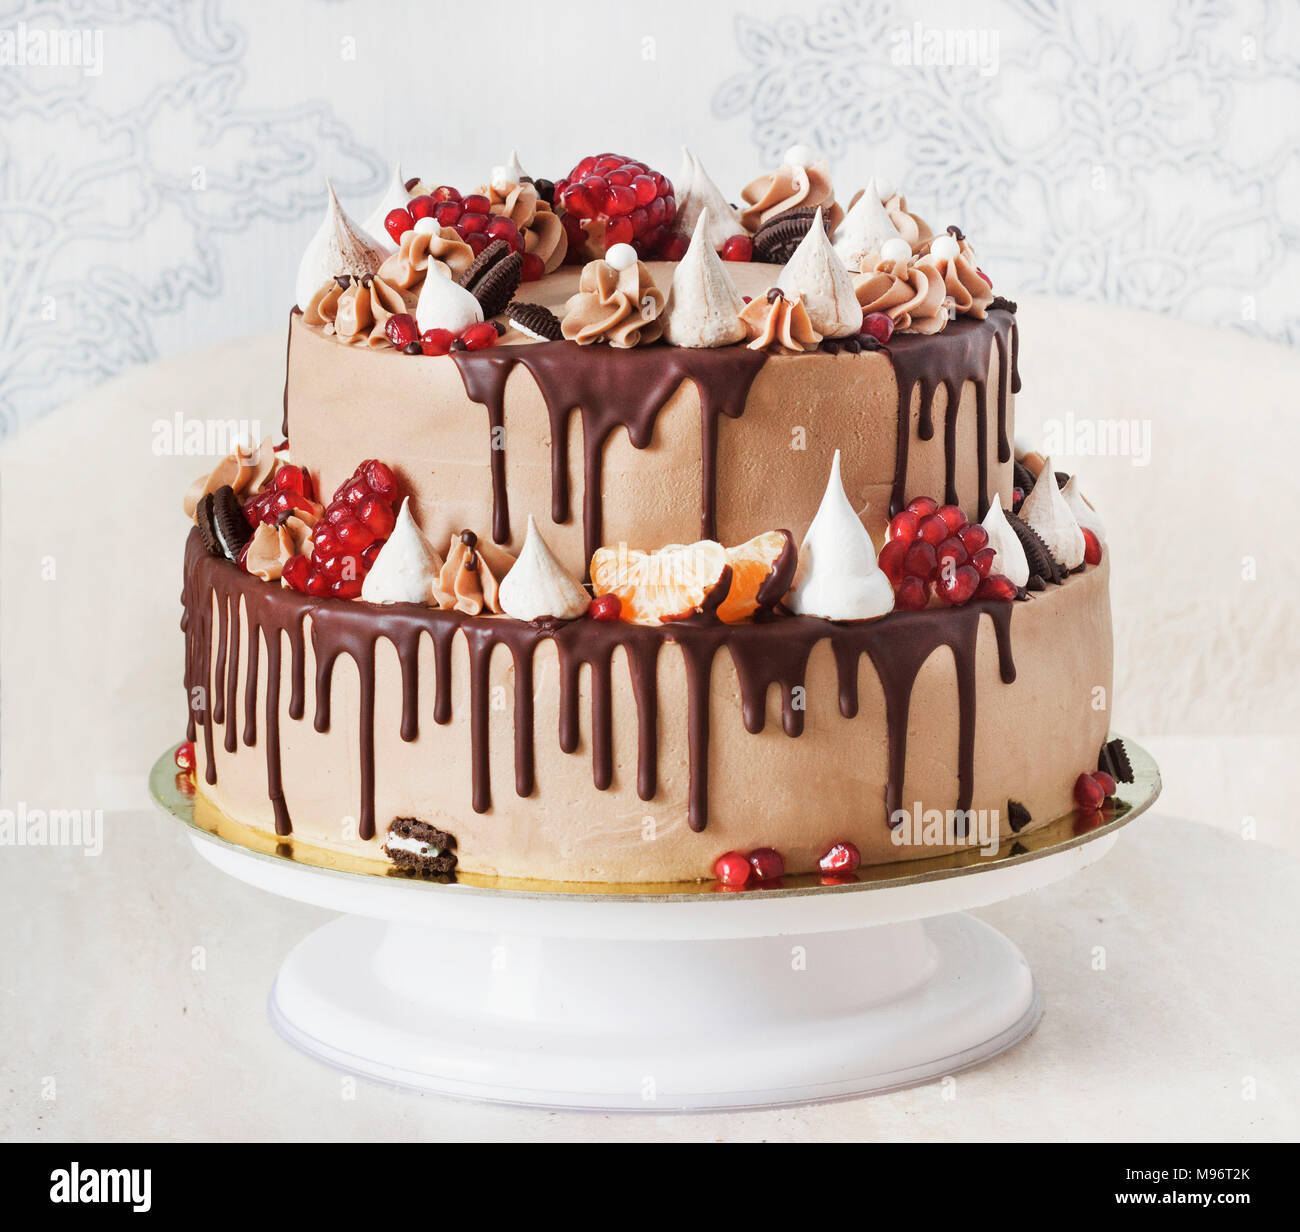 Festive two-tier cake with fruit streaks of chocolate Stock Photo